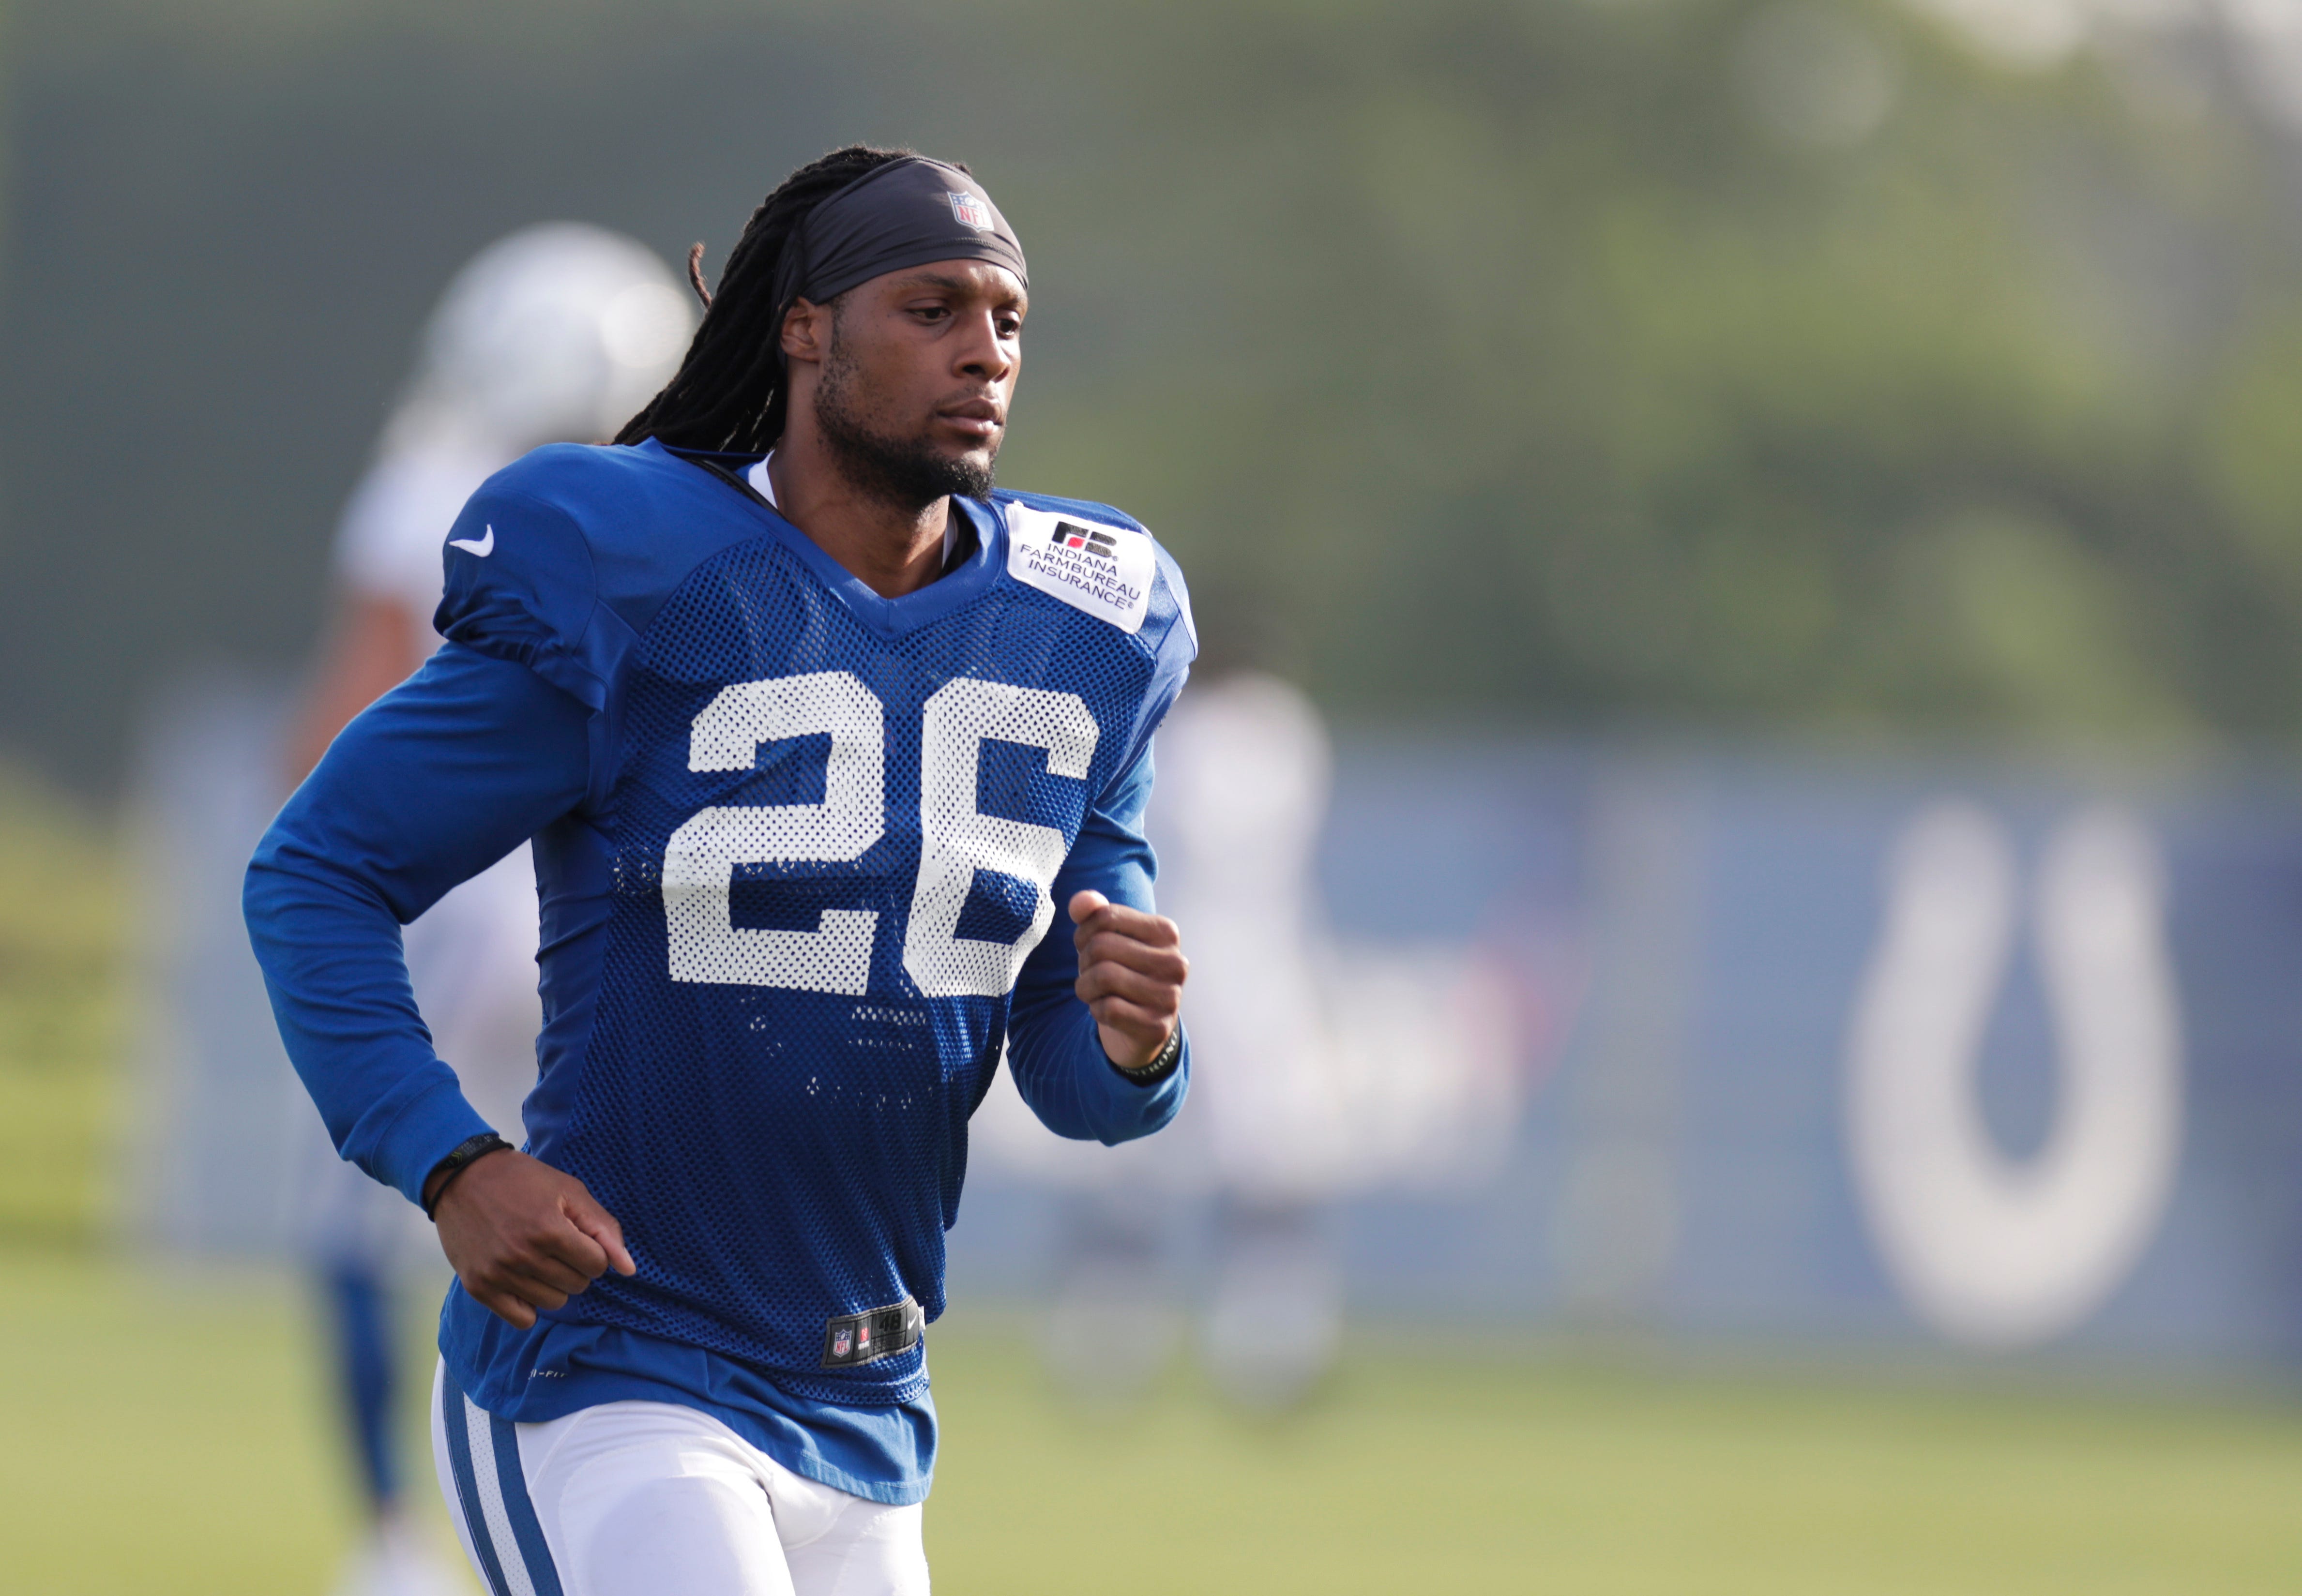 Colts eager to get starting safeties back after knee surgery